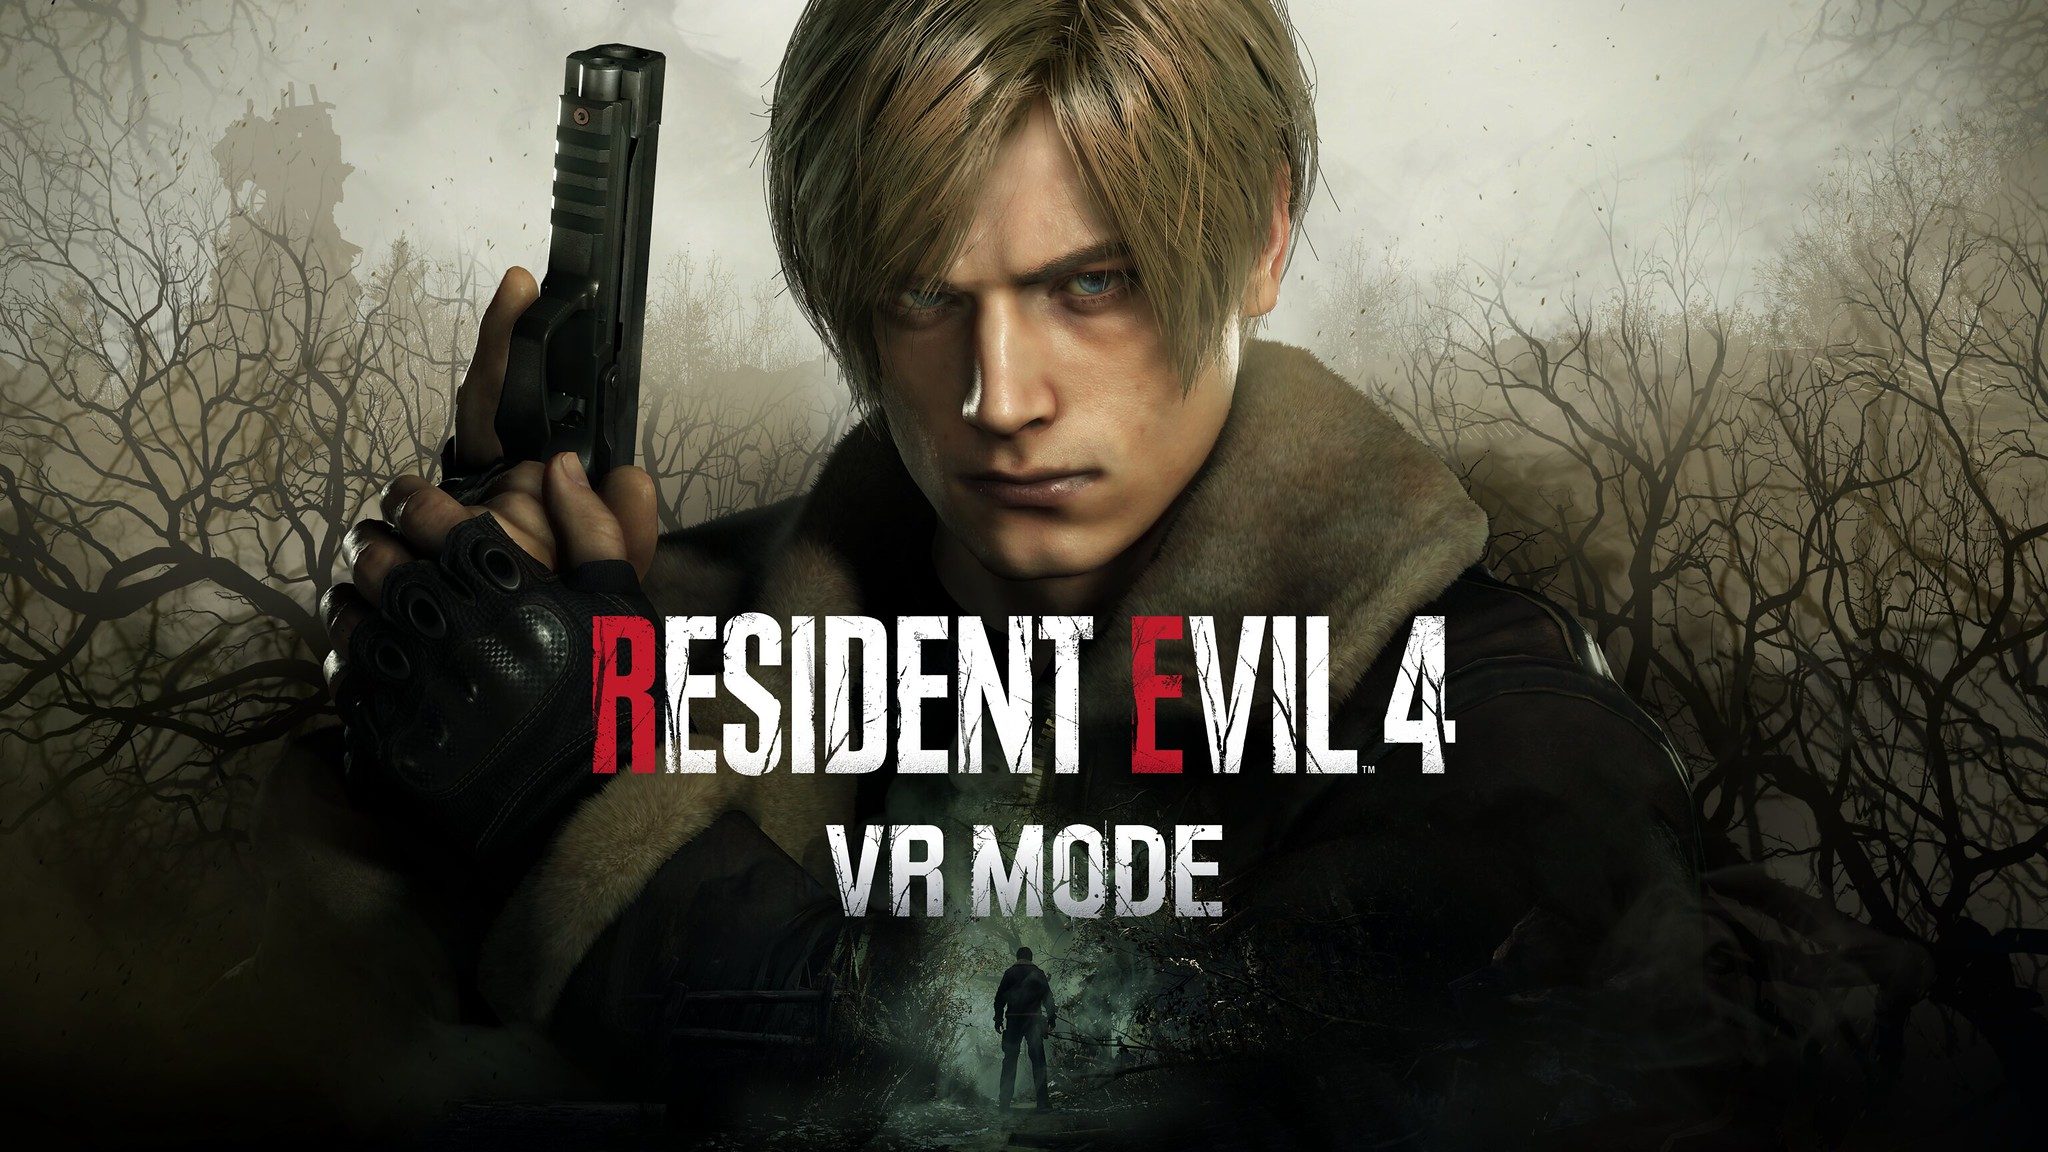 Resident Evil 4 VR Mode out Dec 8, standalone PS VR2 gameplay demo available same day – PlayStation.Blog